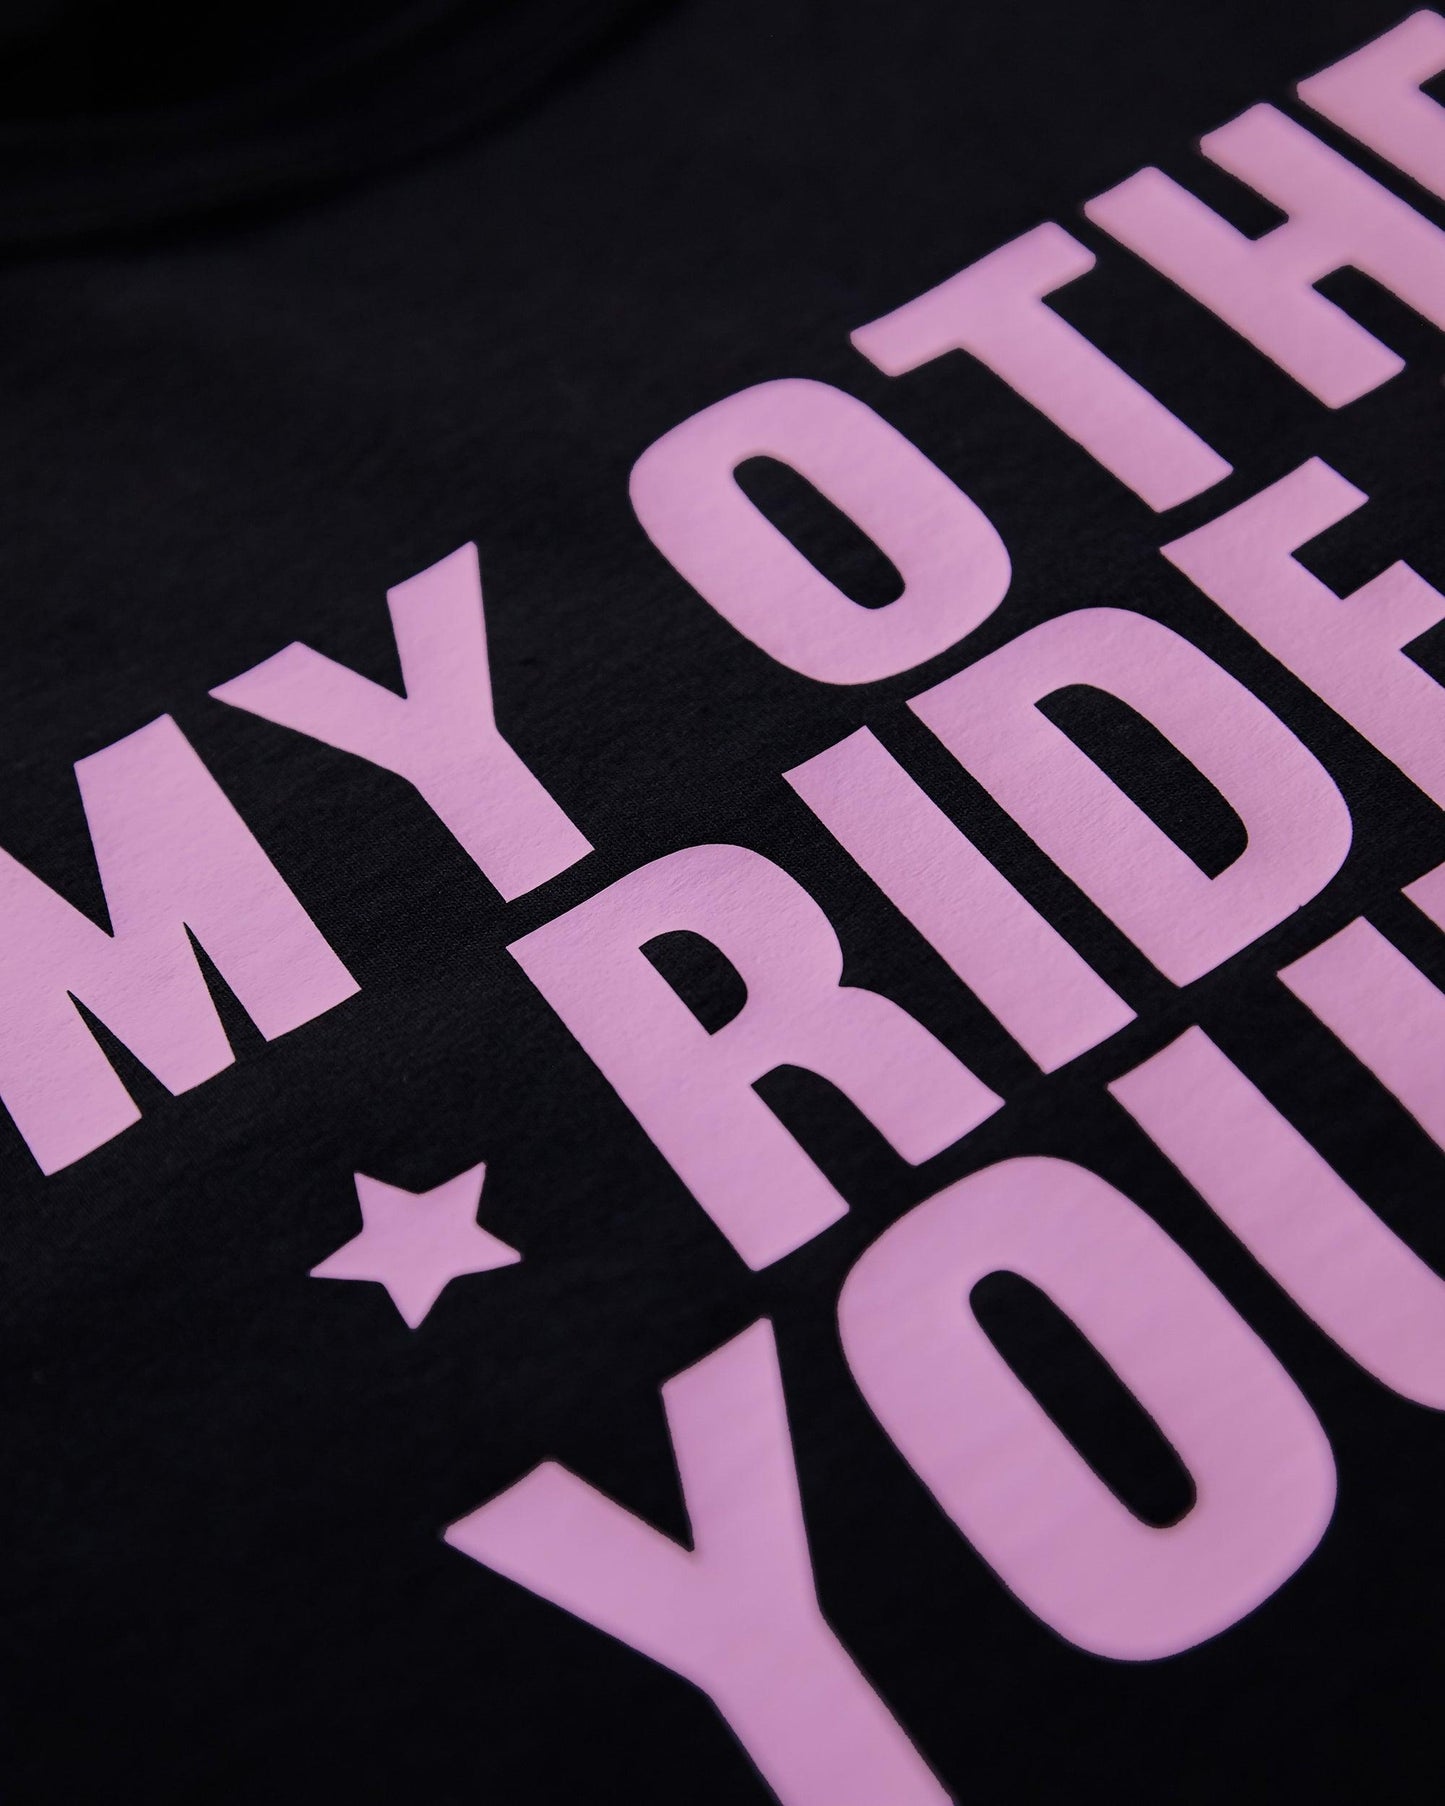 My other ride is your dad, pink on black - mens sleeveless crop cop. - HOMOLONDON